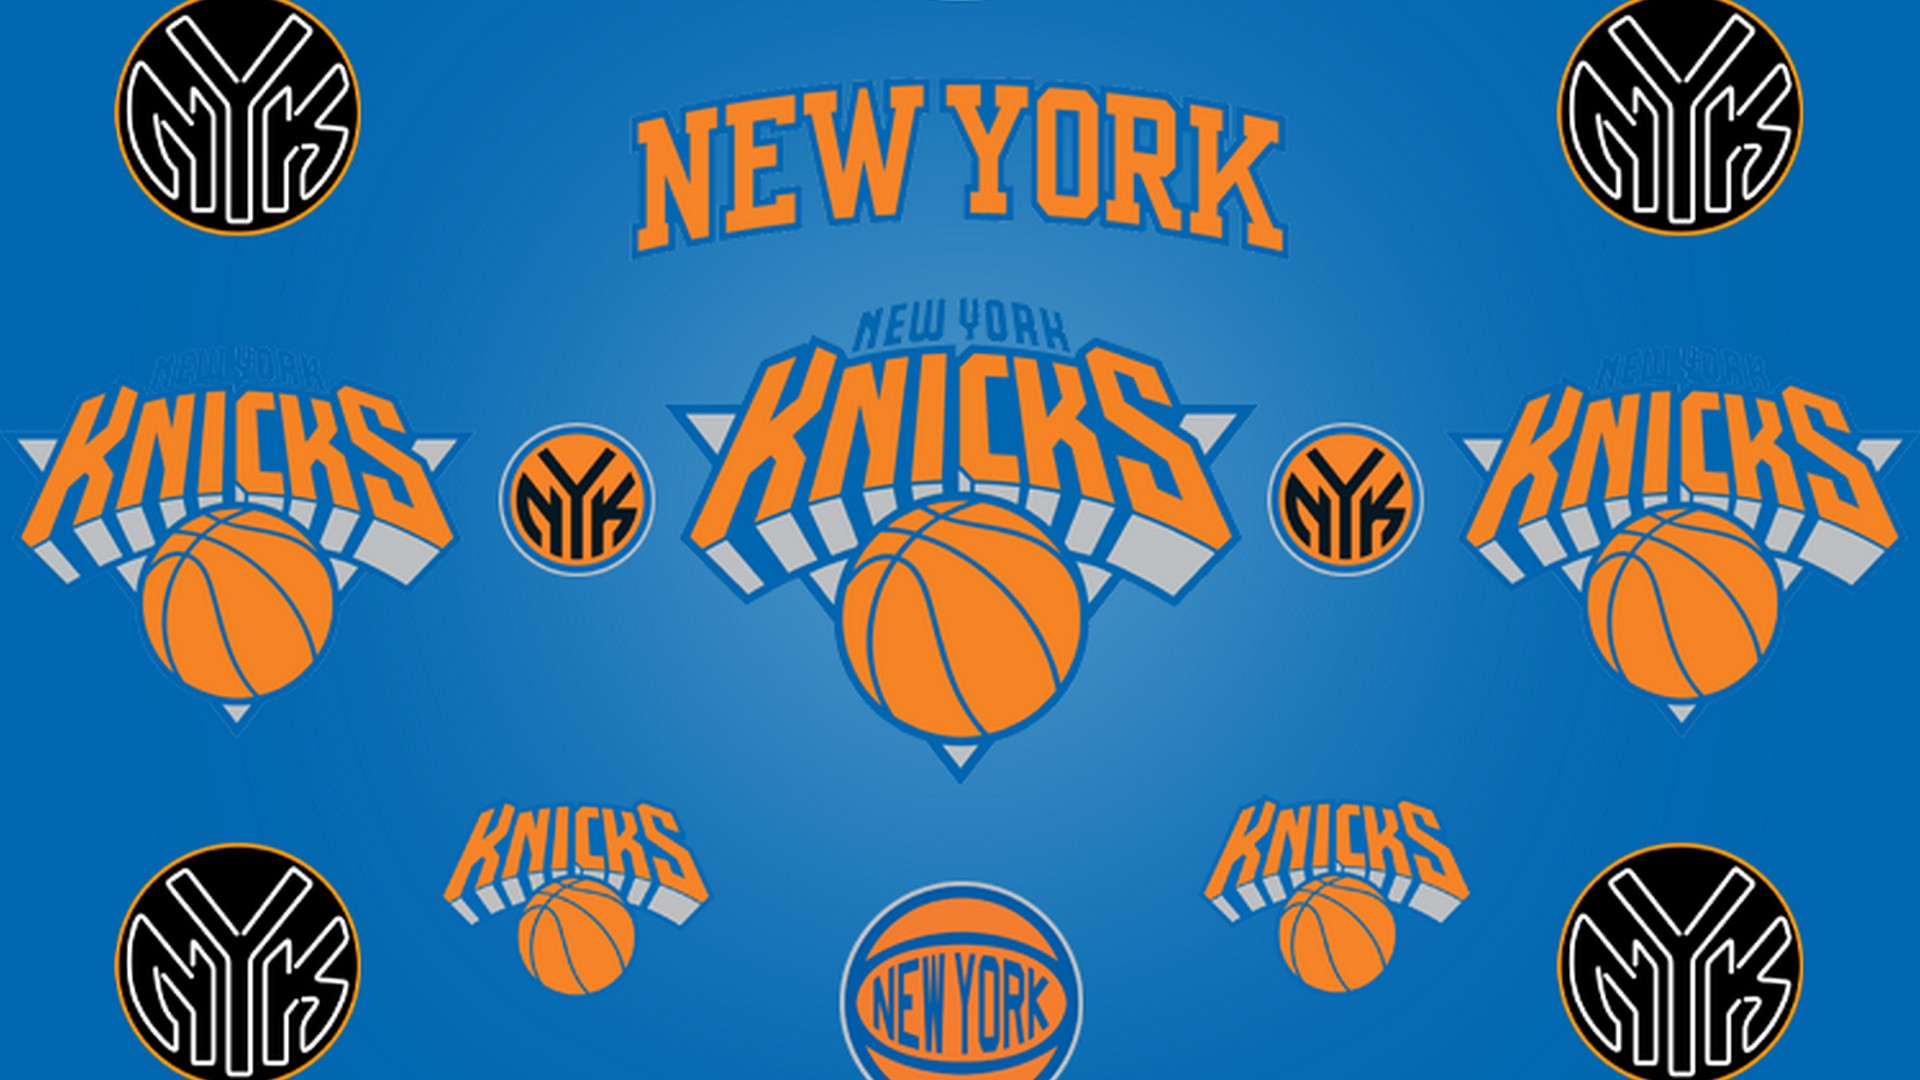 New York Knicks Desktop Wallpapers with image dimensions 1920x1080 pixel. You can make this wallpaper for your Desktop Computer Backgrounds, Windows or Mac Screensavers, iPhone Lock screen, Tablet or Android and another Mobile Phone device